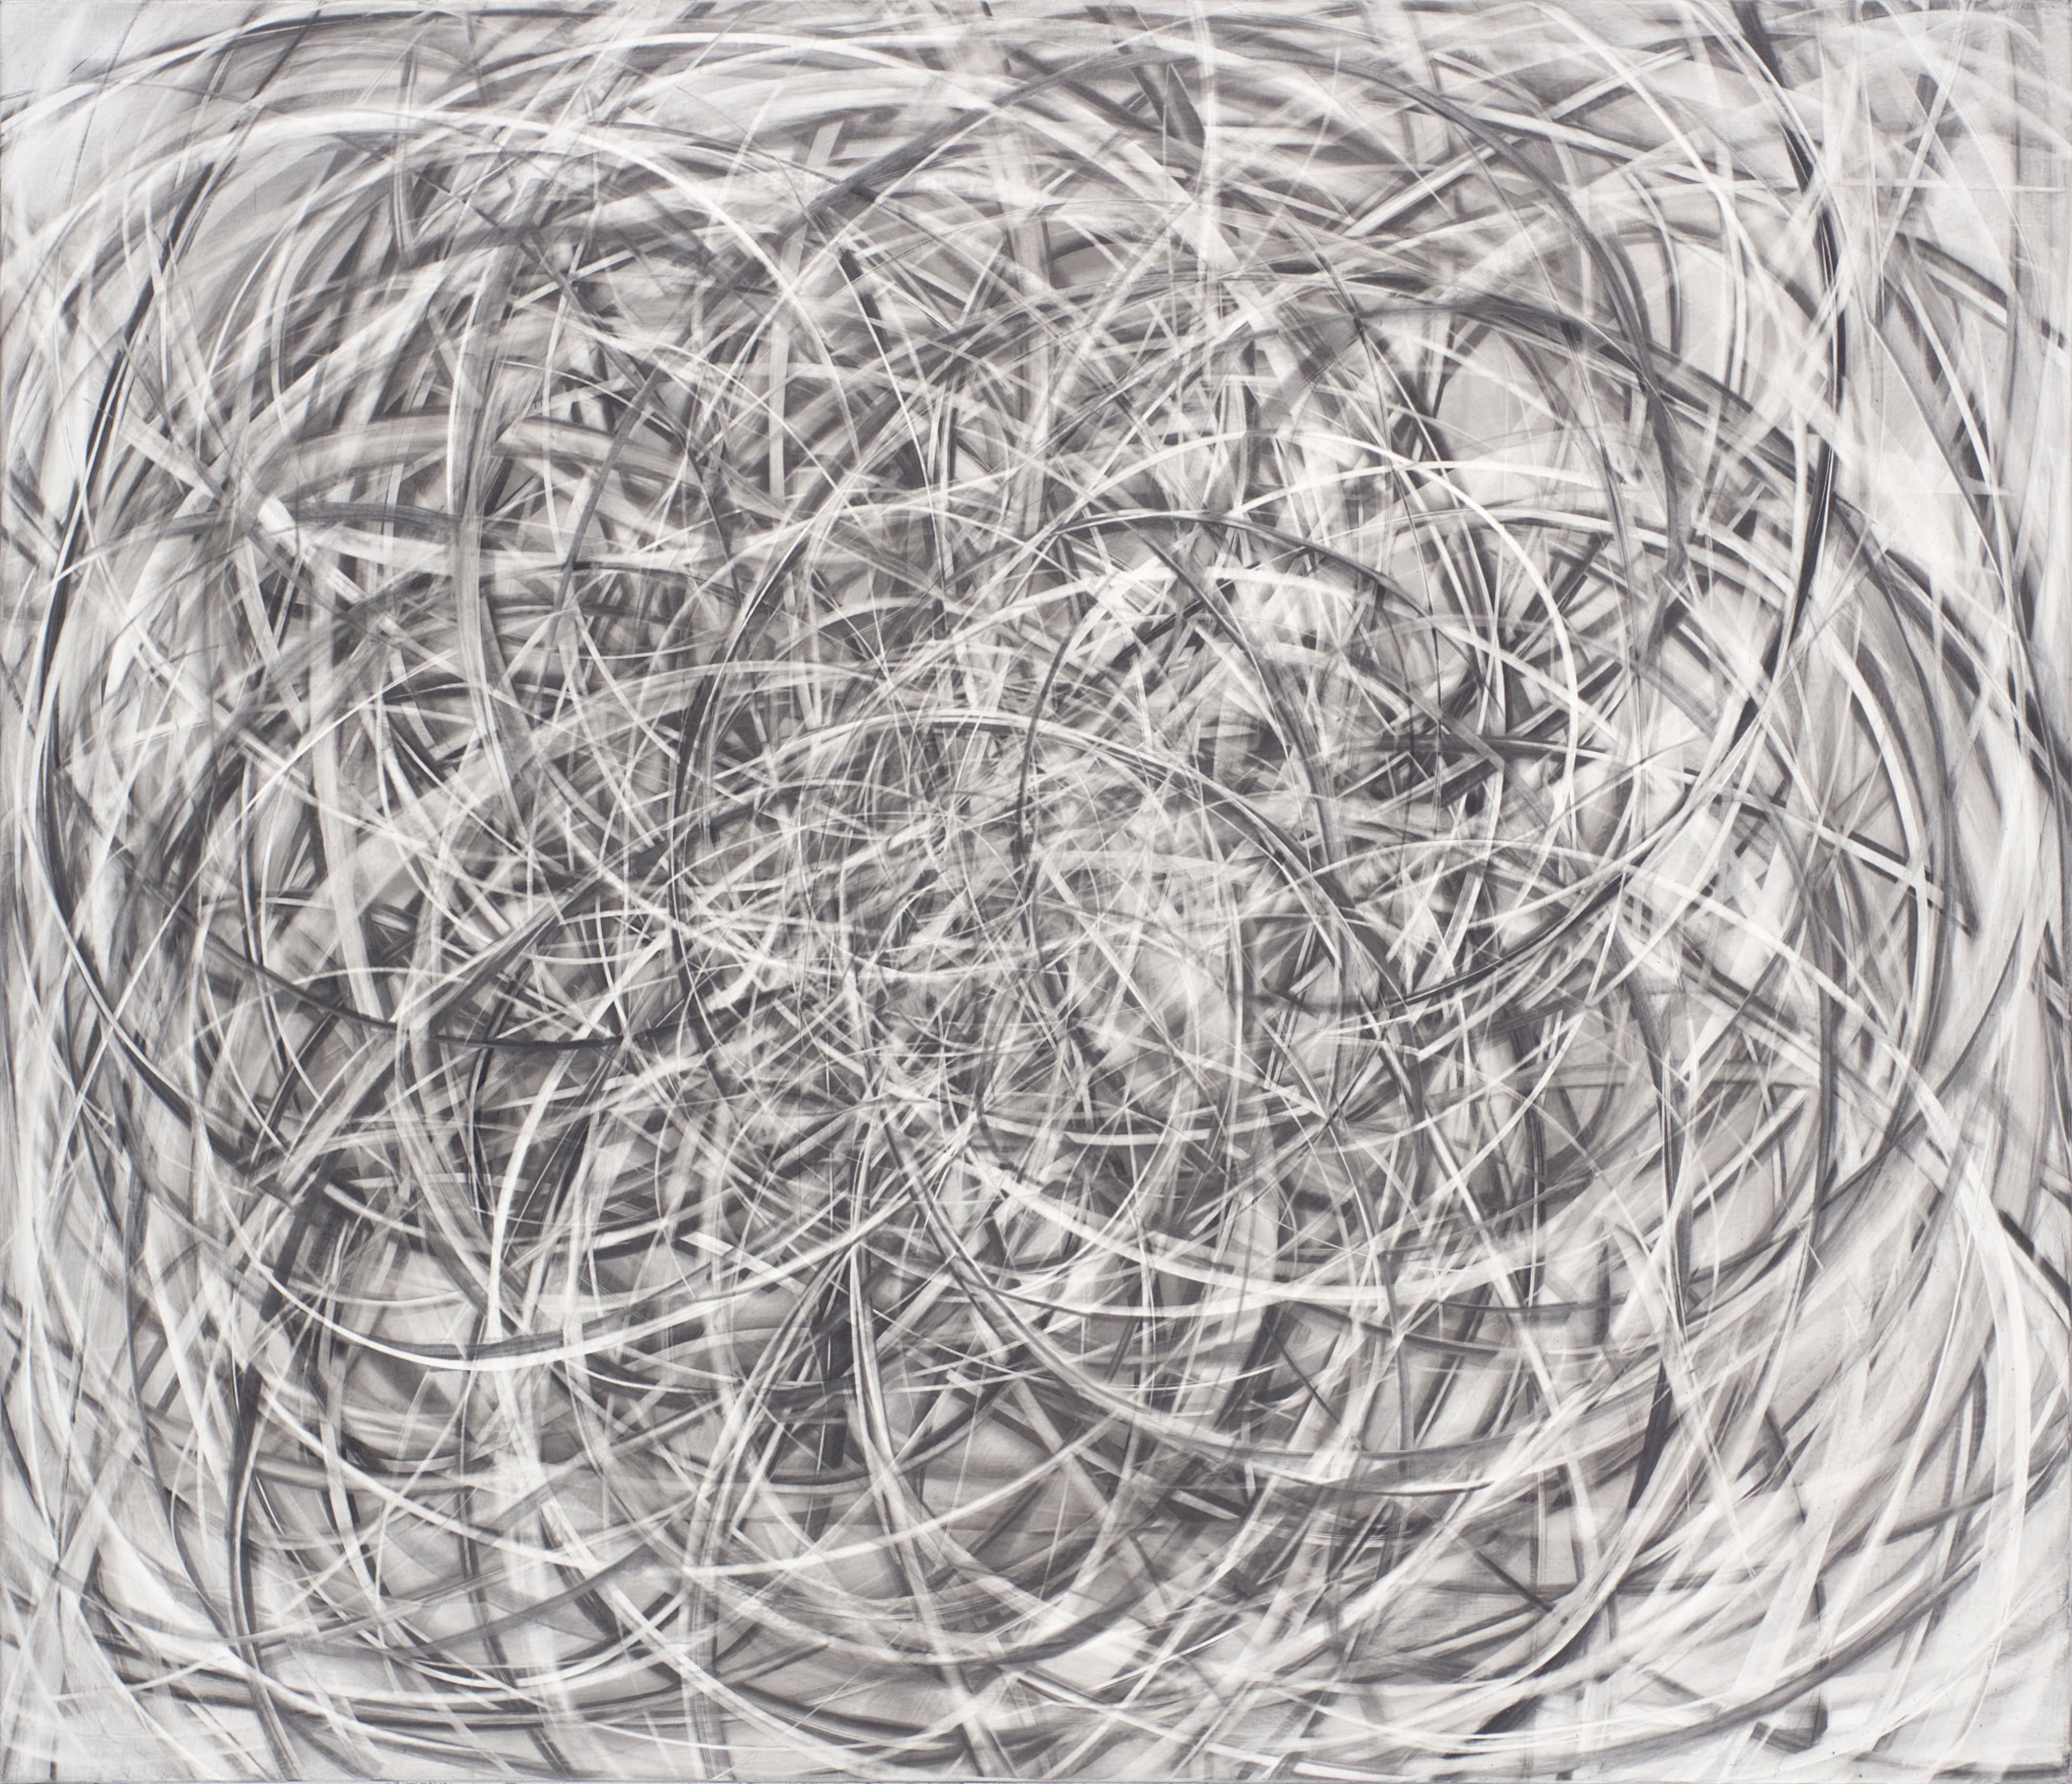 Mill, 34 x 40 inches oil, alkyd and graphite on linen, 2015